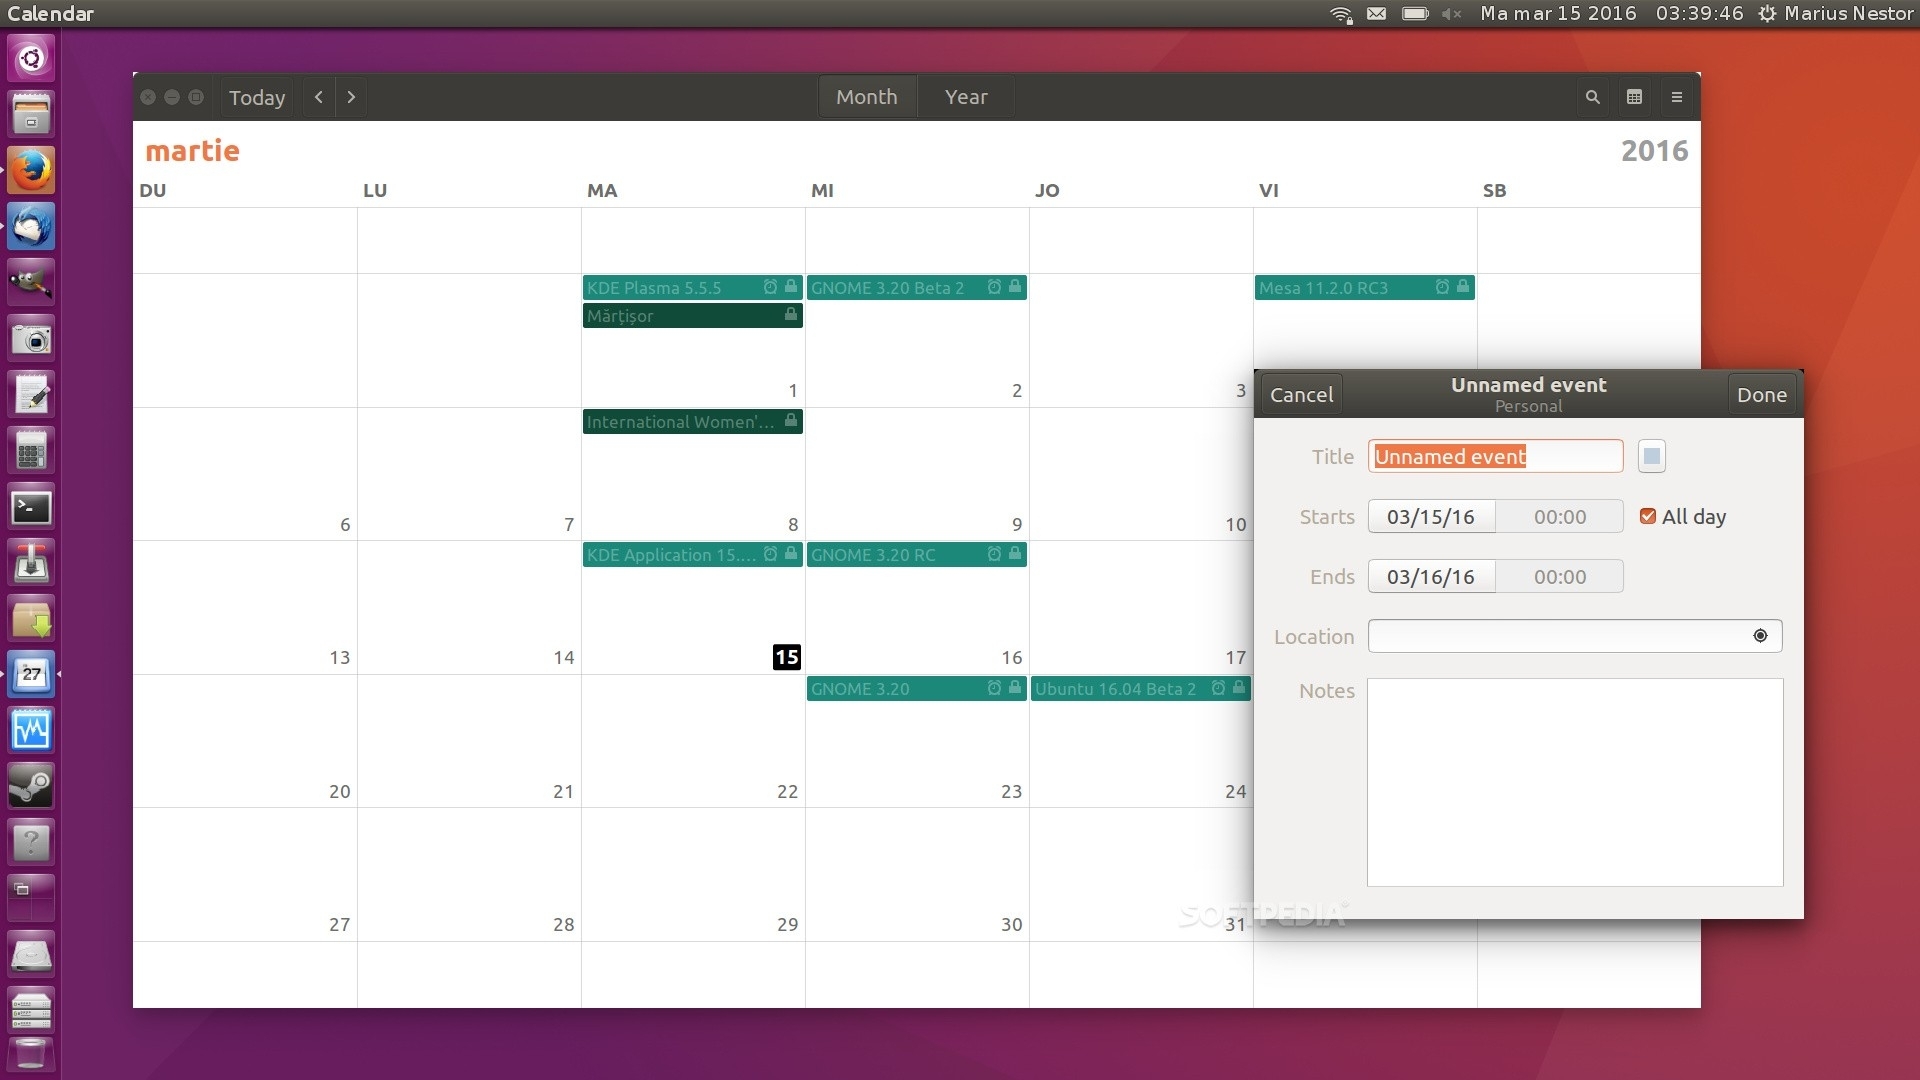 Gnome Calendar App Now Fades Out Past Events, Respects 12/24